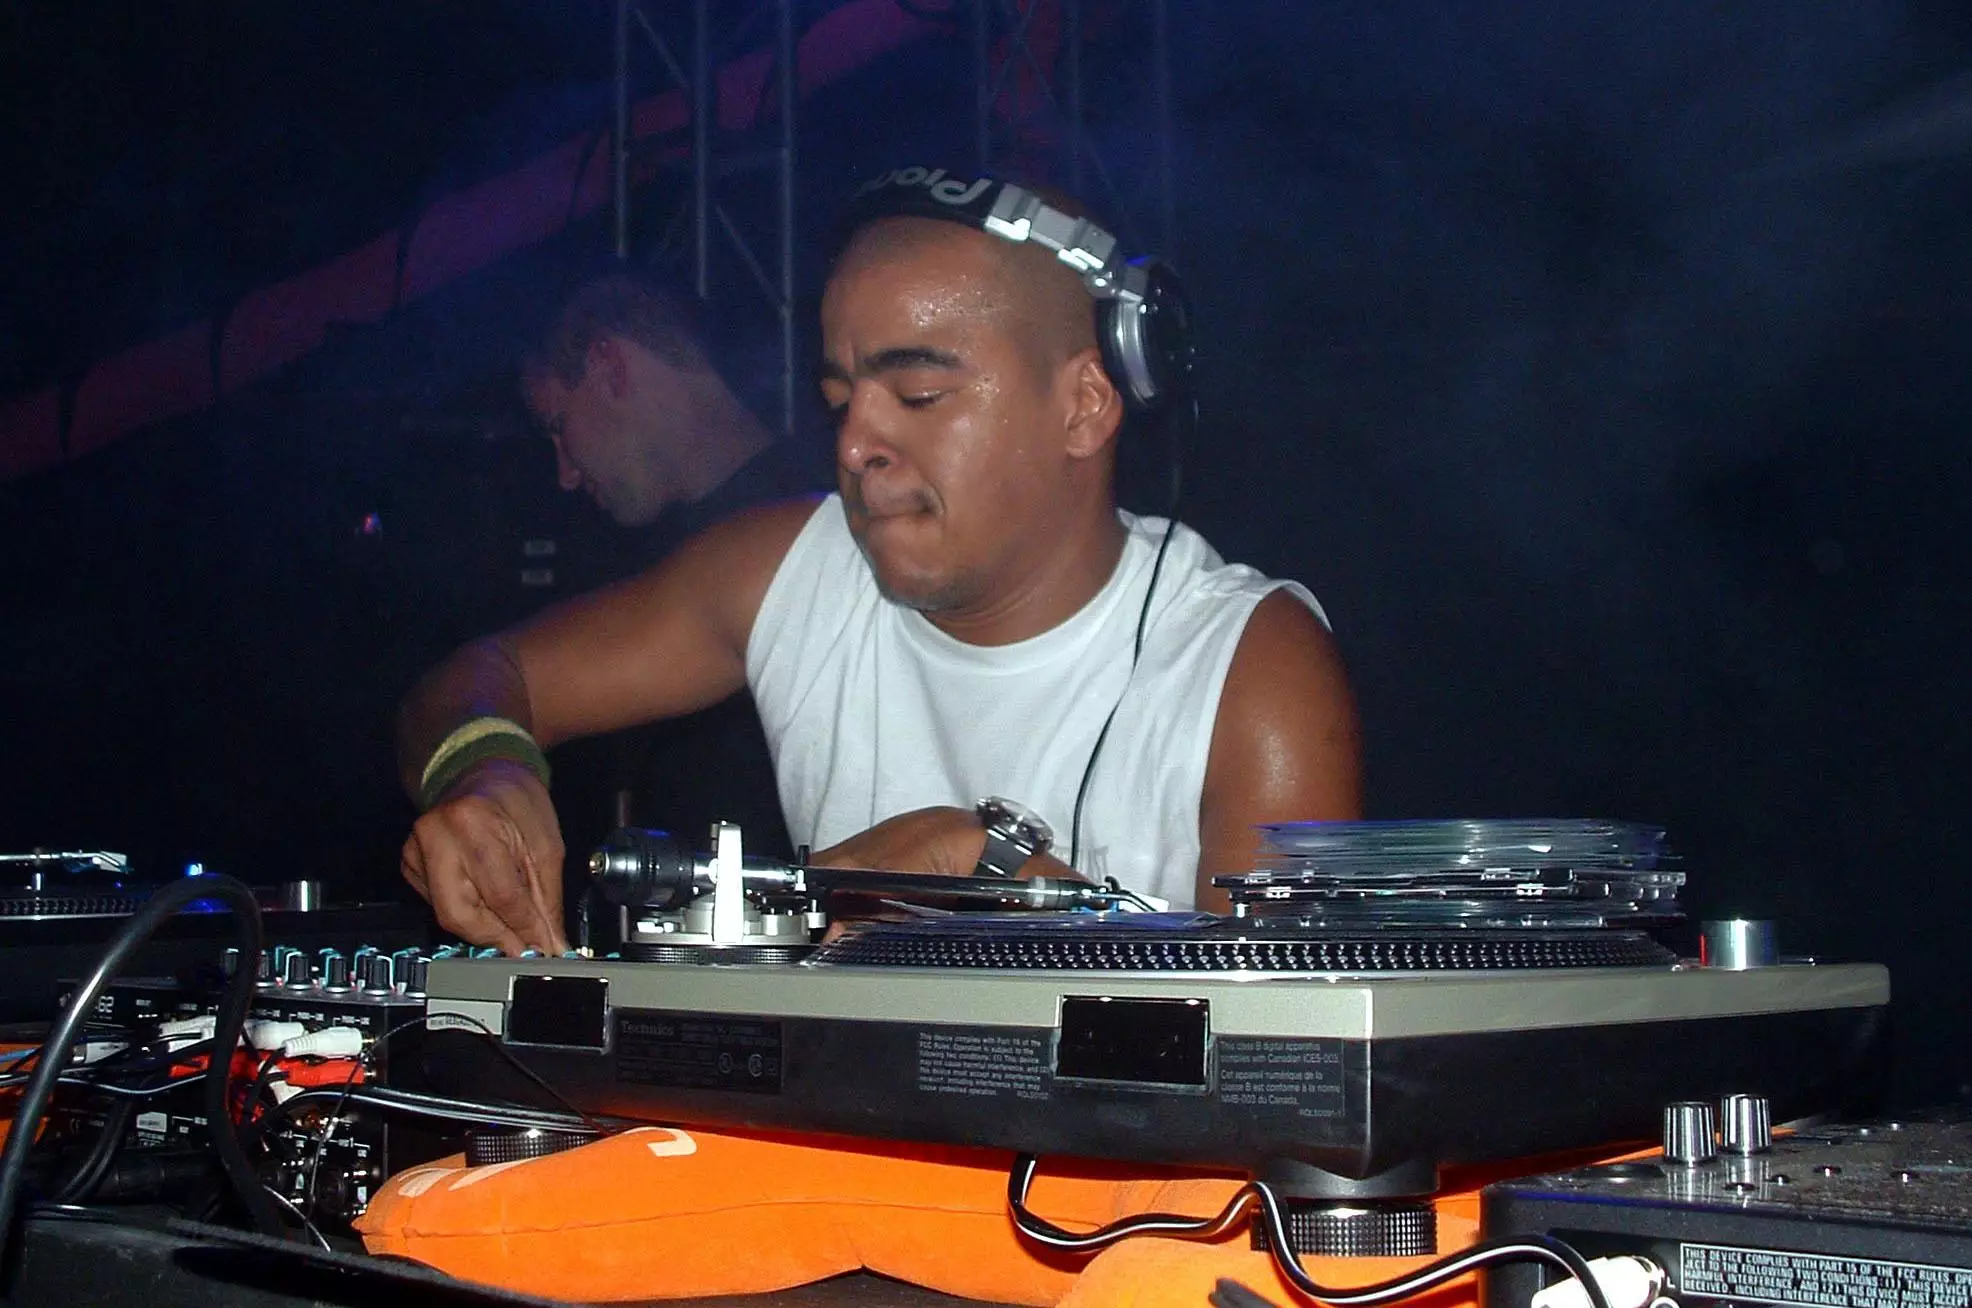 Morillo djing at the Ultra Music Festival, which was held at Bayfront, in Miami back in 2004.